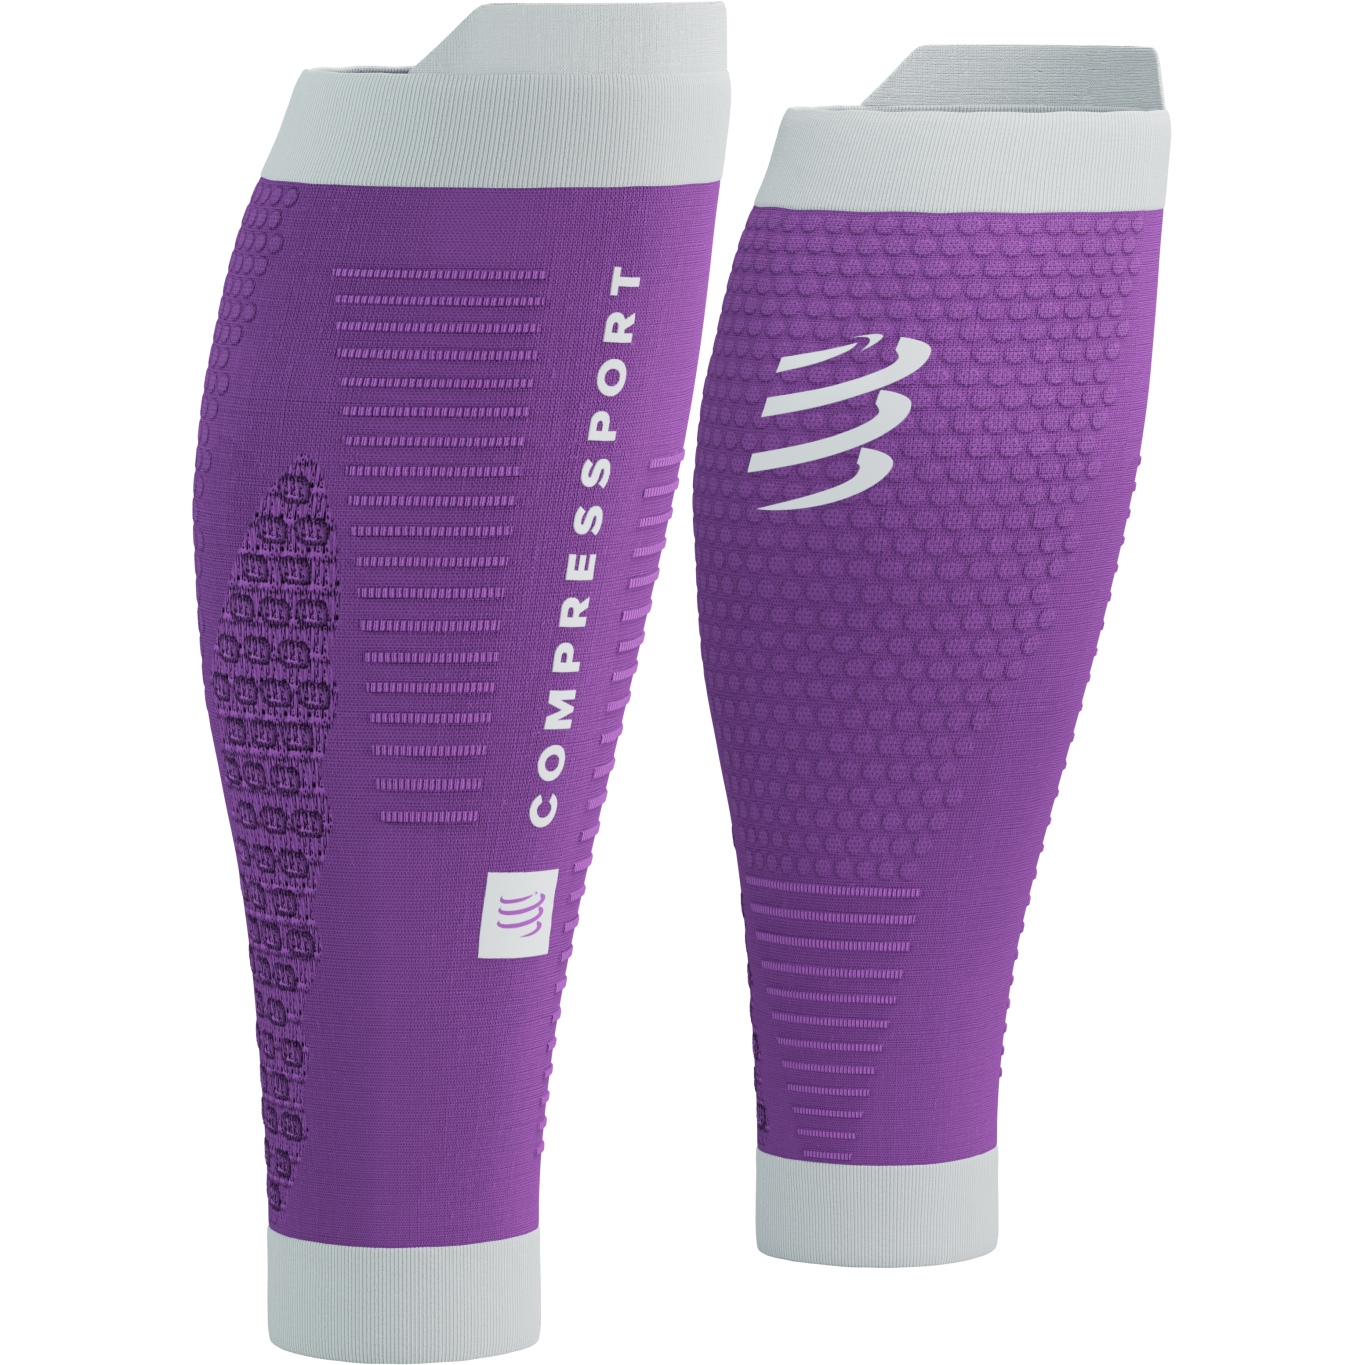 Picture of Compressport R2 3.0 Compression Calf Sleeves - royal lilac/white